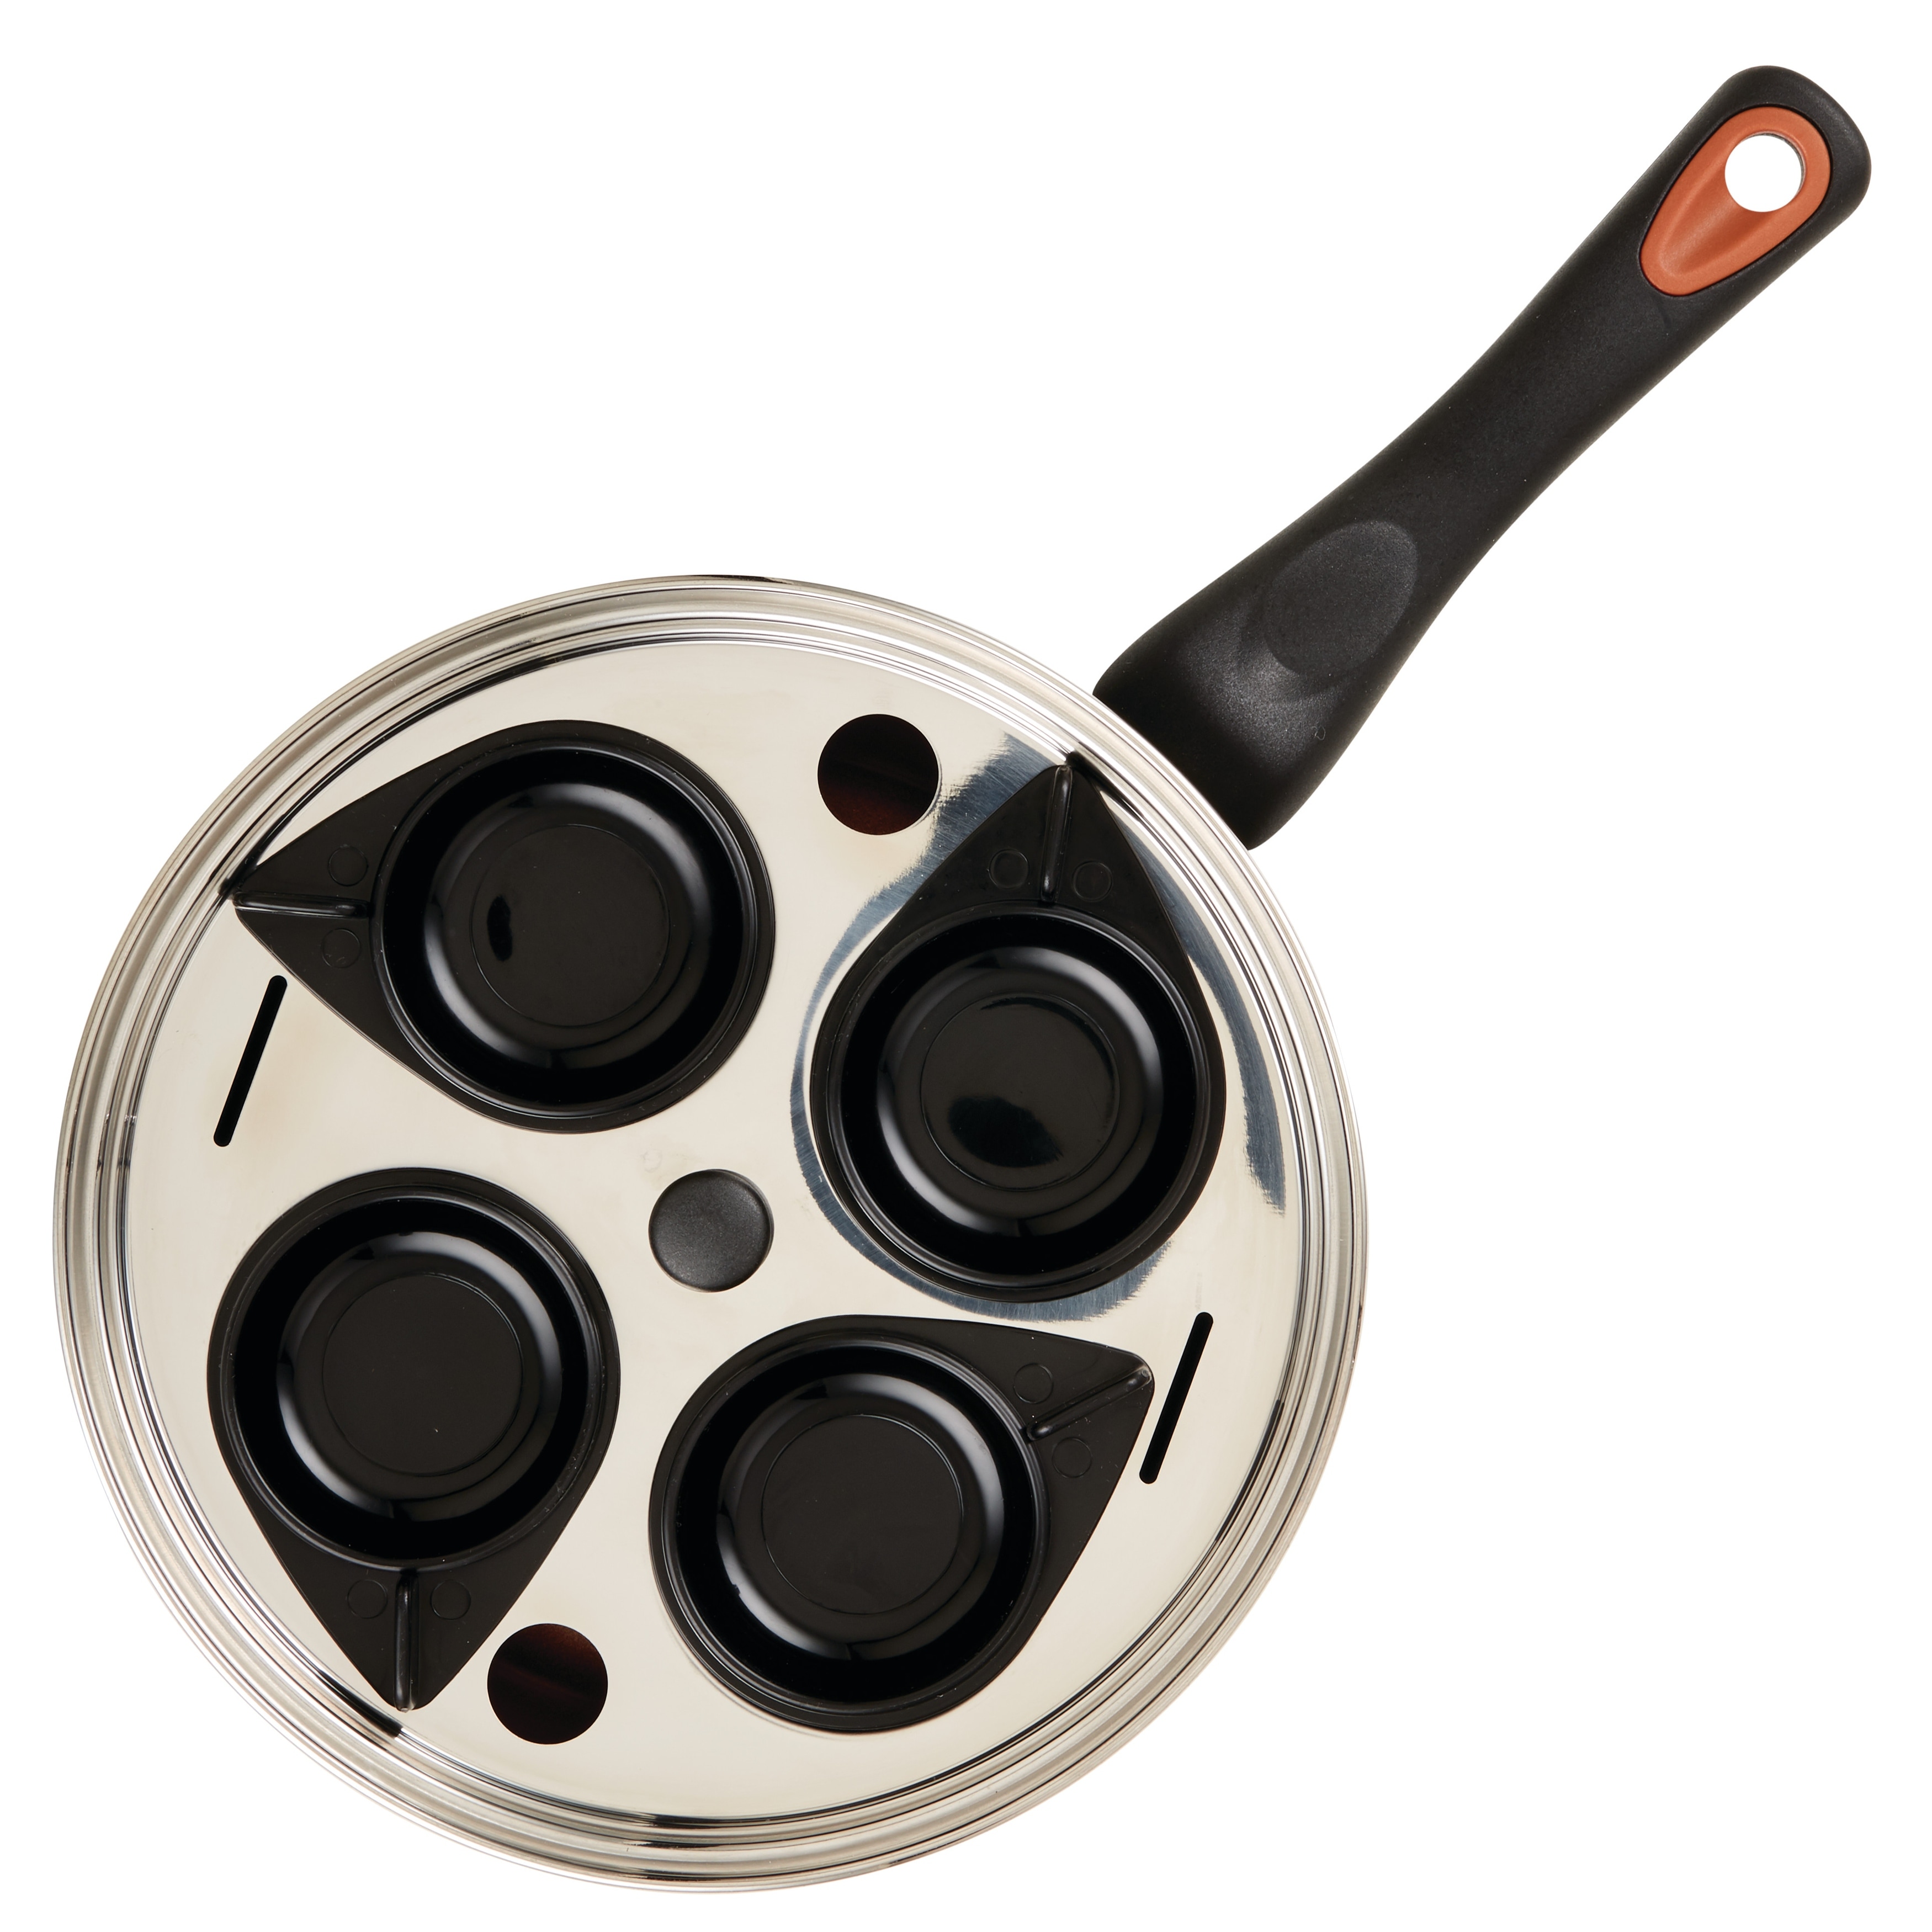 Mini Frying Pan 4.7inch Non-stick Small Pancake Pan With Handle 12 Cm For One  Egg Cooking Pan